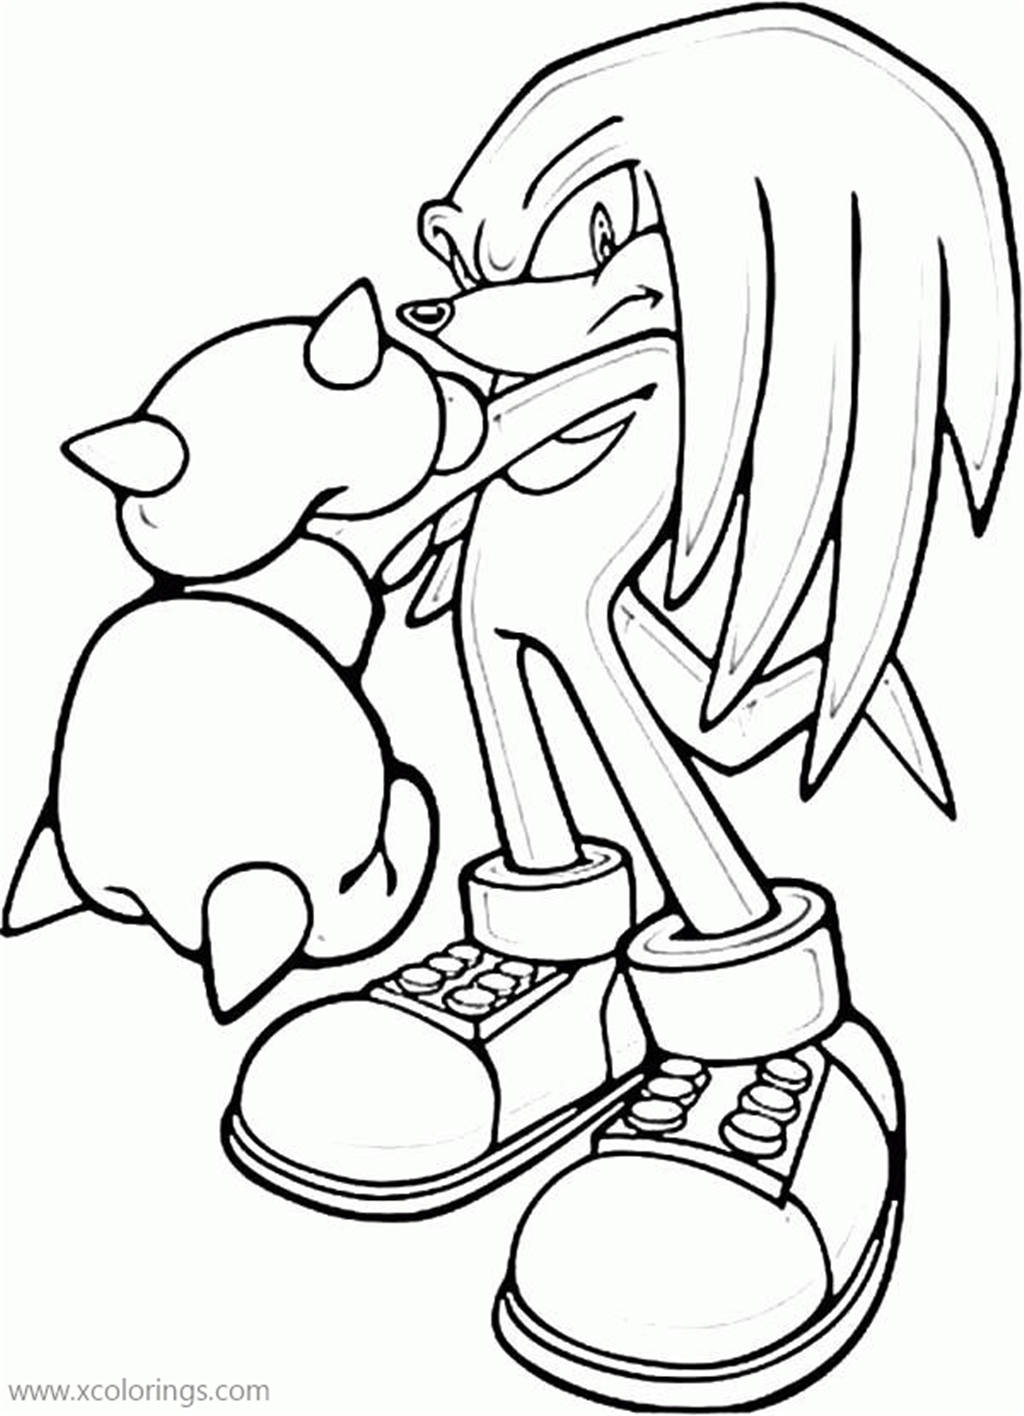 Knuckles Coloring Page from Sonic the Hedgehog